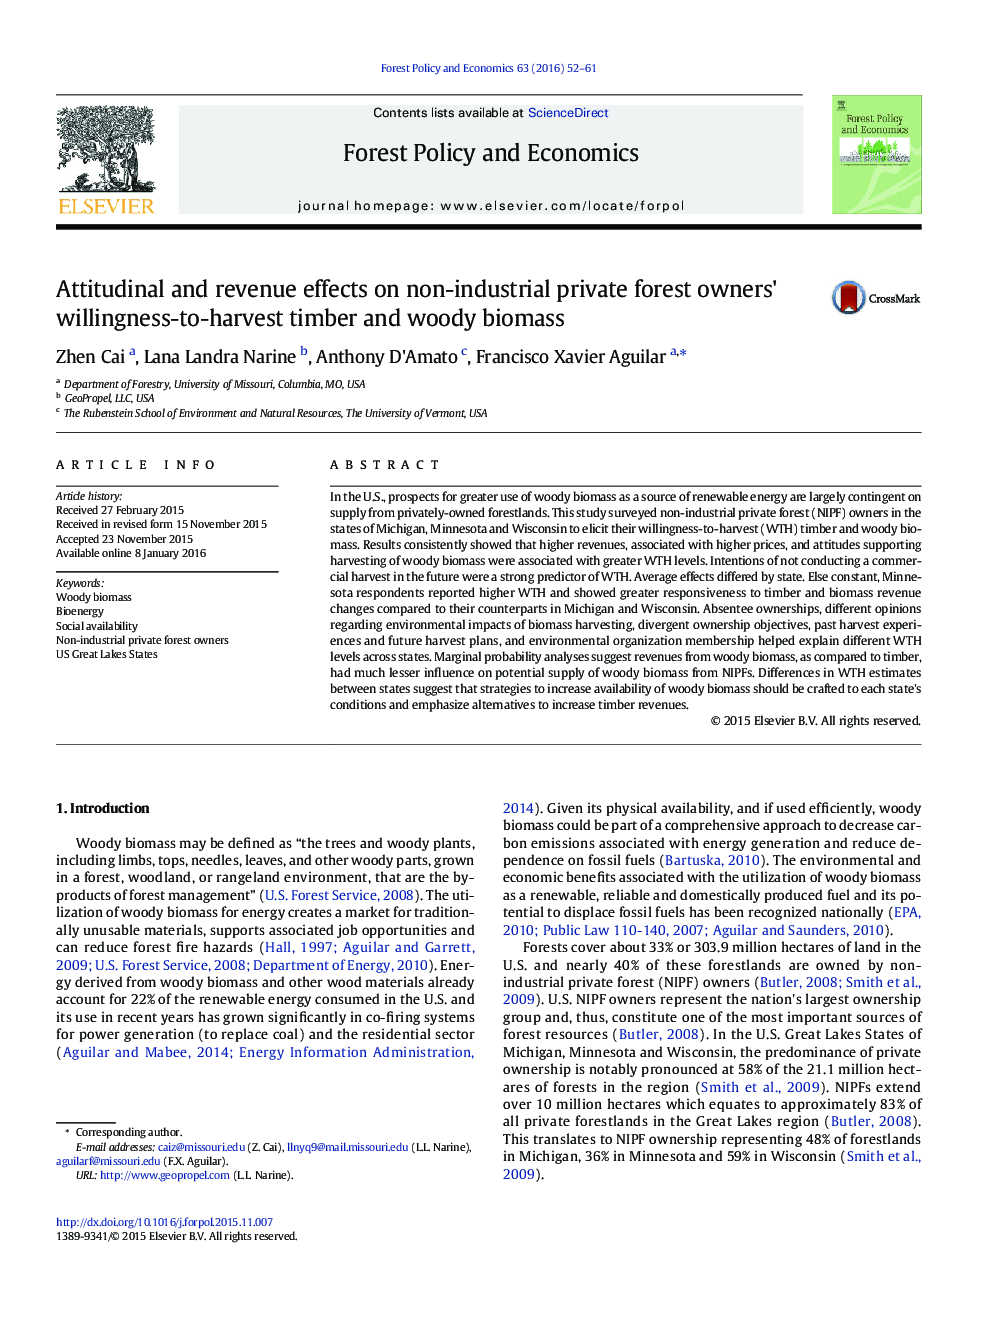 Attitudinal and revenue effects on non-industrial private forest owners' willingness-to-harvest timber and woody biomass